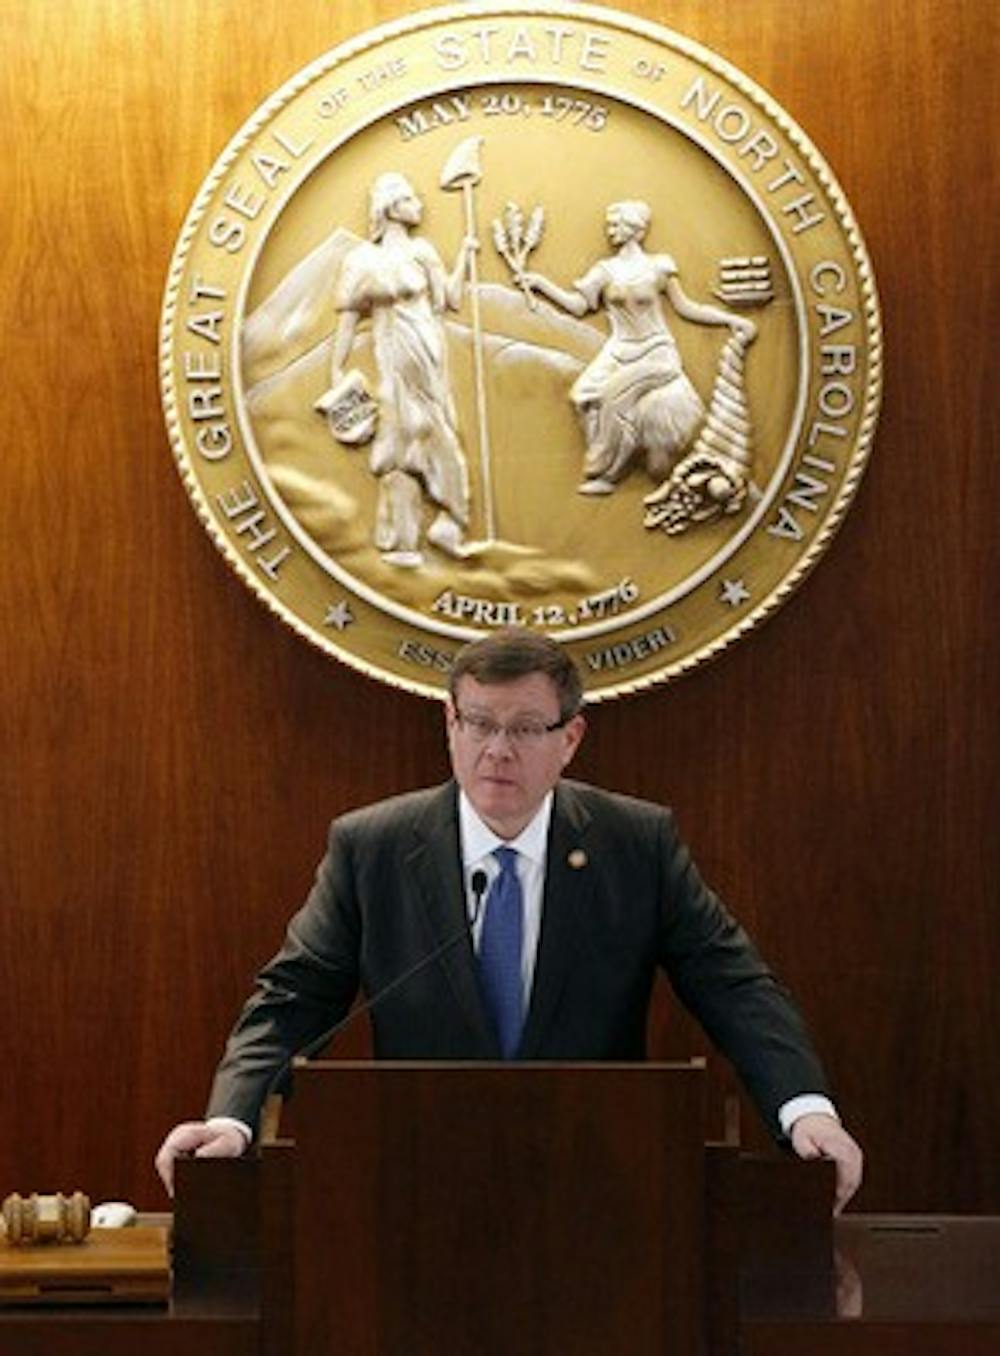 N.C. House Speaker Tim Moore speaks as the N.C. General Assembly convenes for a special session at the Legislative Building on Dec. 21, 2016 in Raleigh, N.C. Moore invited President Donald Trump to give his State of the Union address at his state's General Assembly chambers. (Chris Seward/Raleigh News & Observer/TNS)
